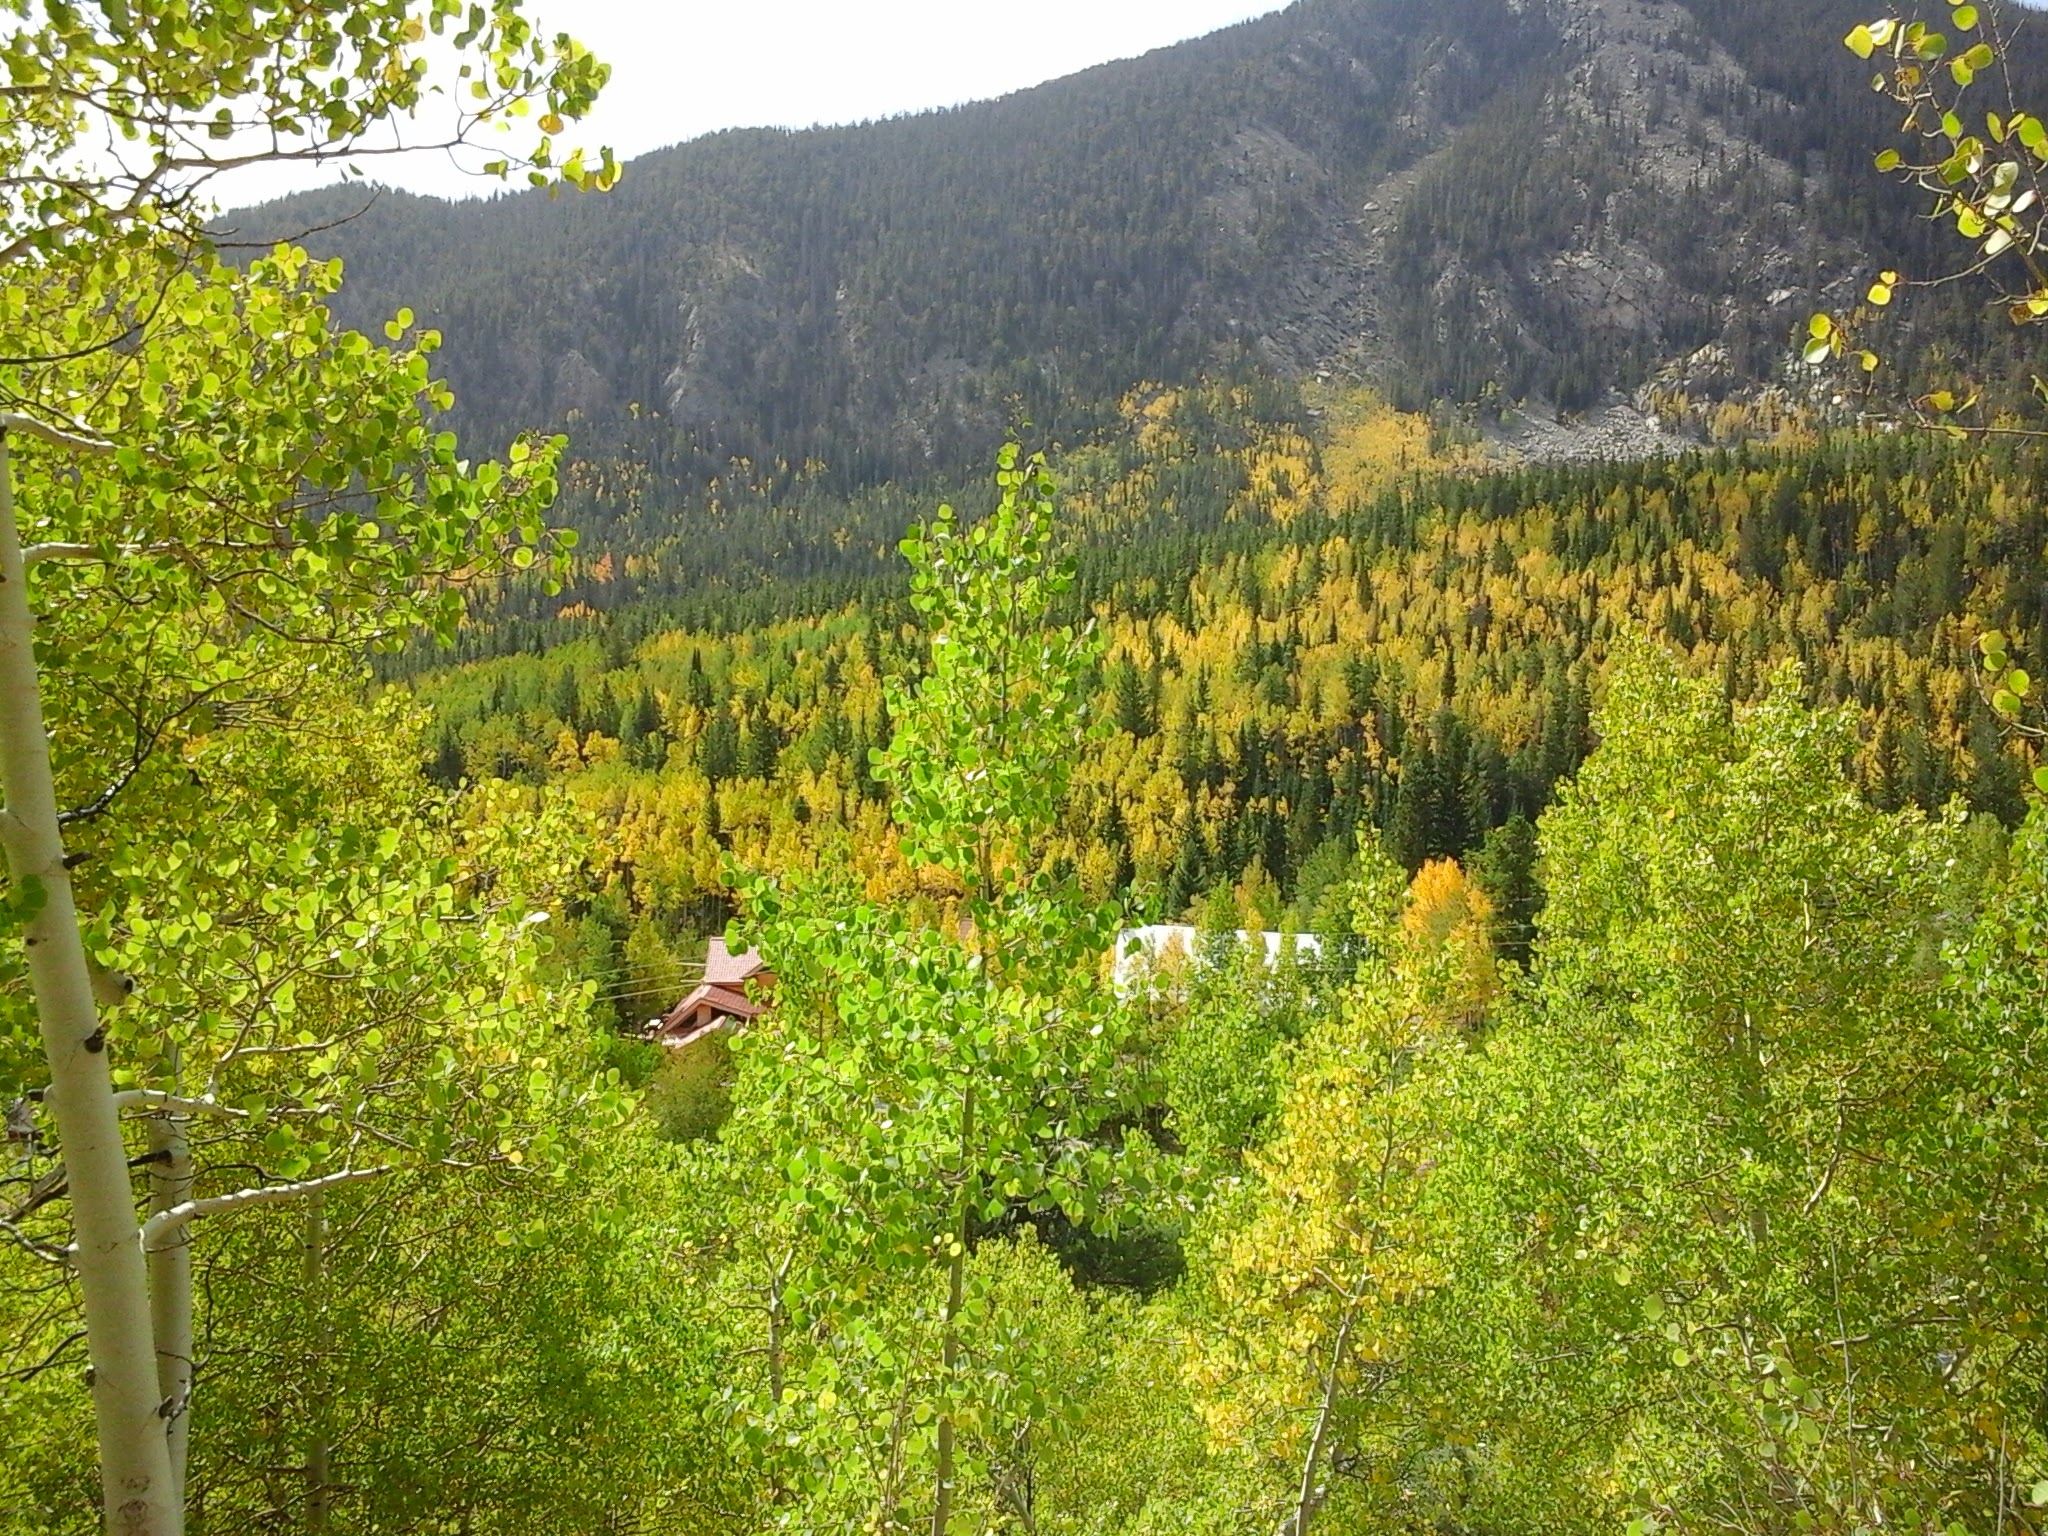 Exterior photos of fall colors in the mountains.